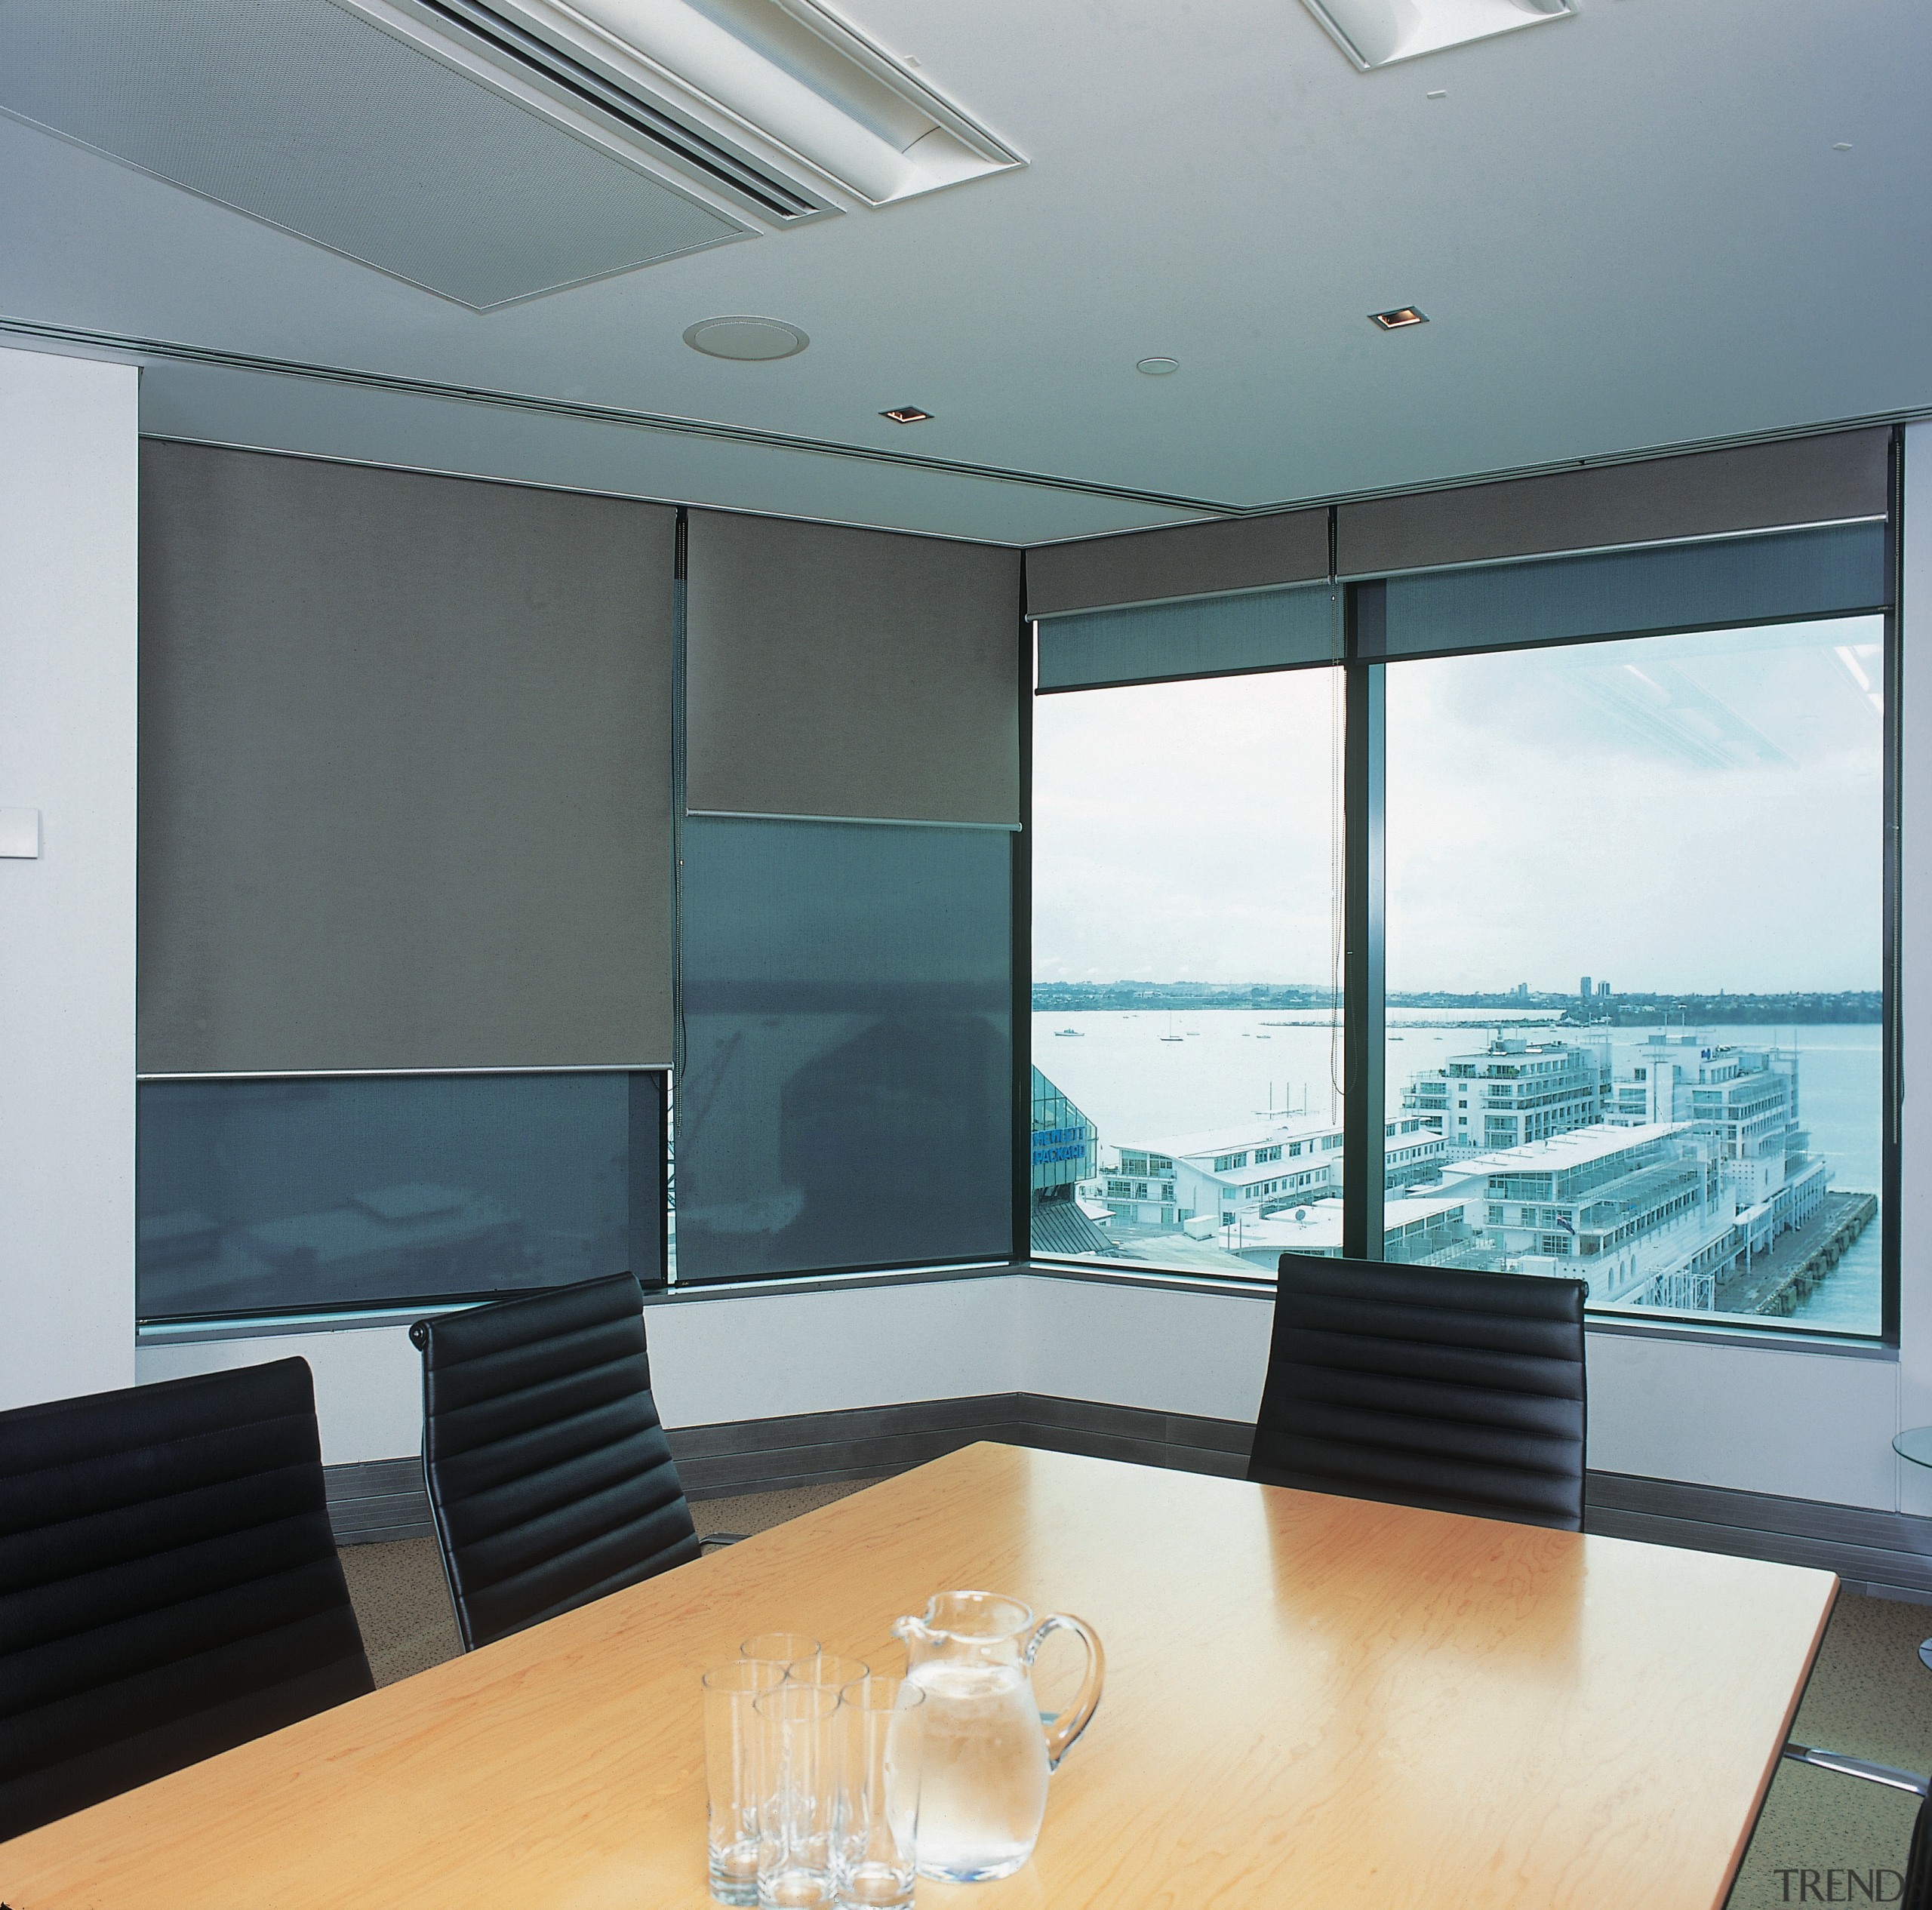 Office meeting room with roller sunscreen shades at architecture, ceiling, daylighting, glass, interior design, office, window, gray